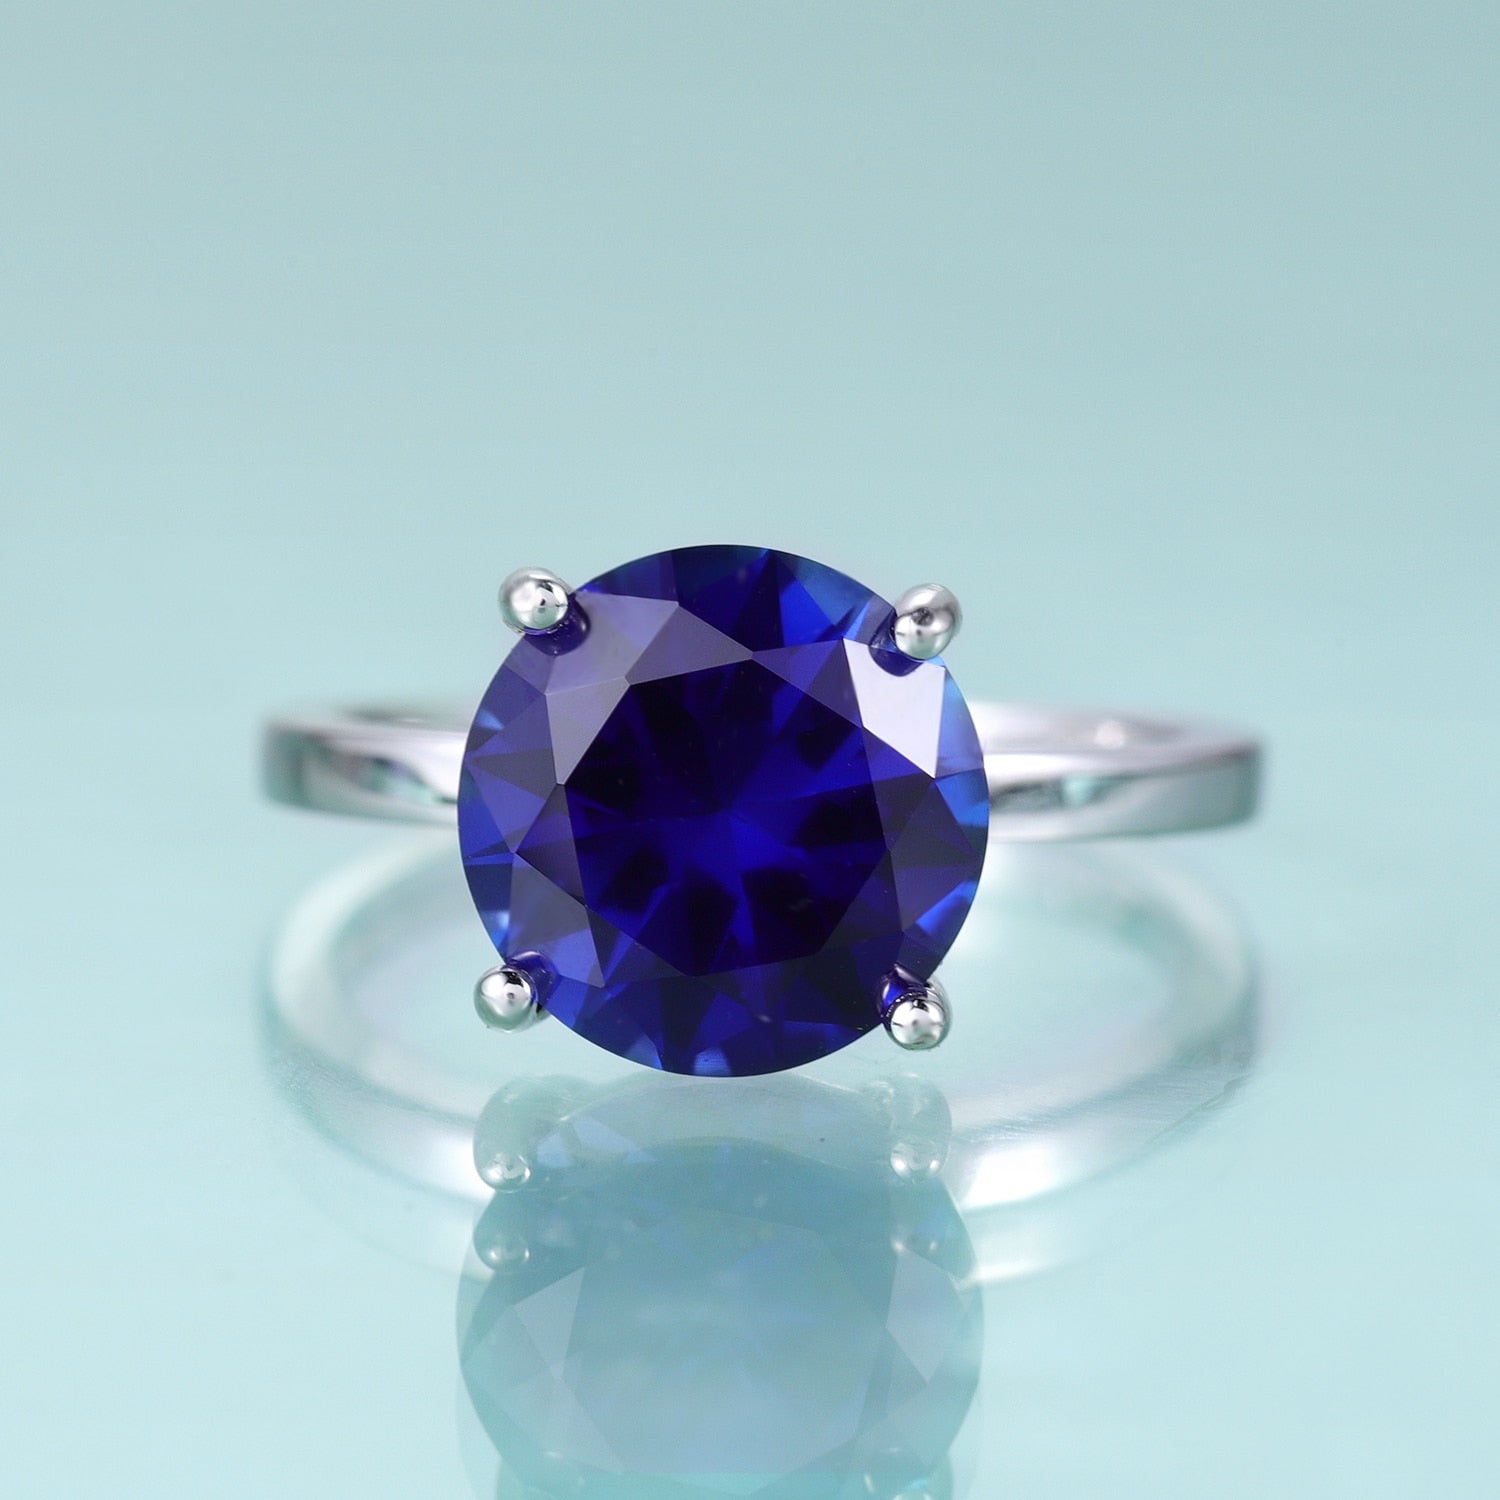 GEM'S BALLET Round Lab Blue Sapphire Four Prong Solitaire Engagement Rings 925 Sterling Silver Gemstone Ring Gift For Her